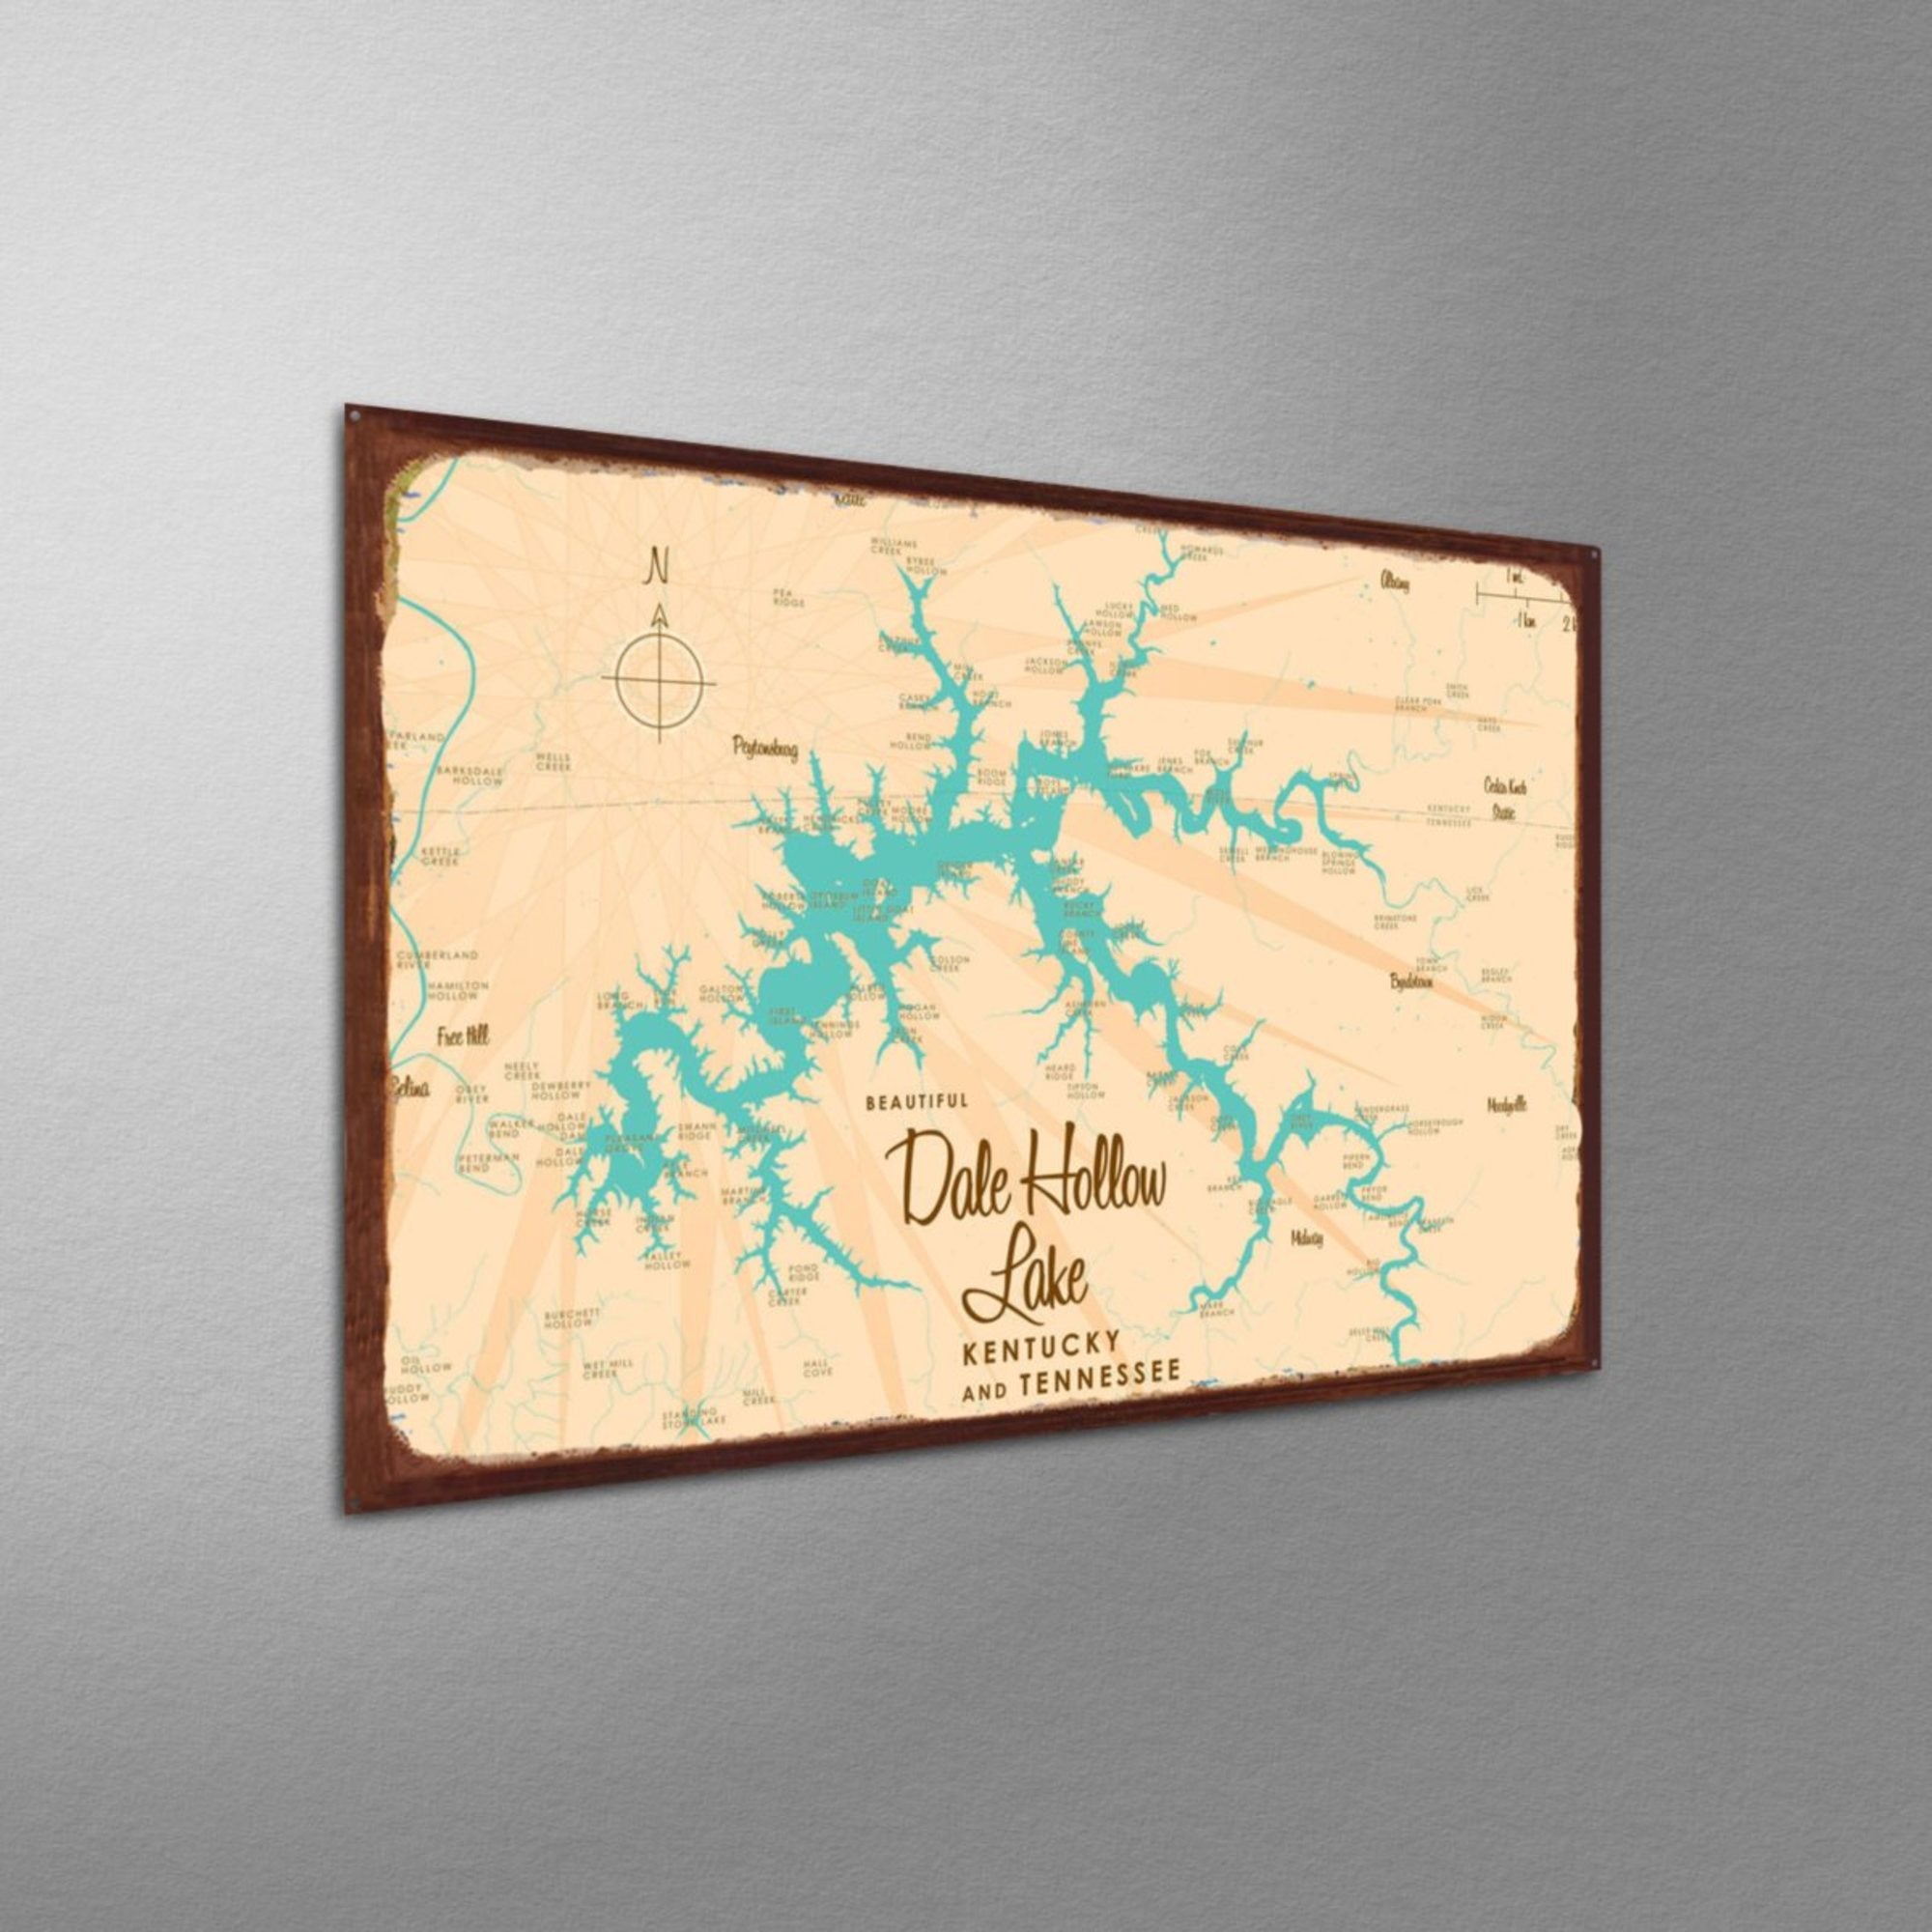 Dale Hollow Lake Kentucky Tennessee, Rustic Metal Sign Map Art